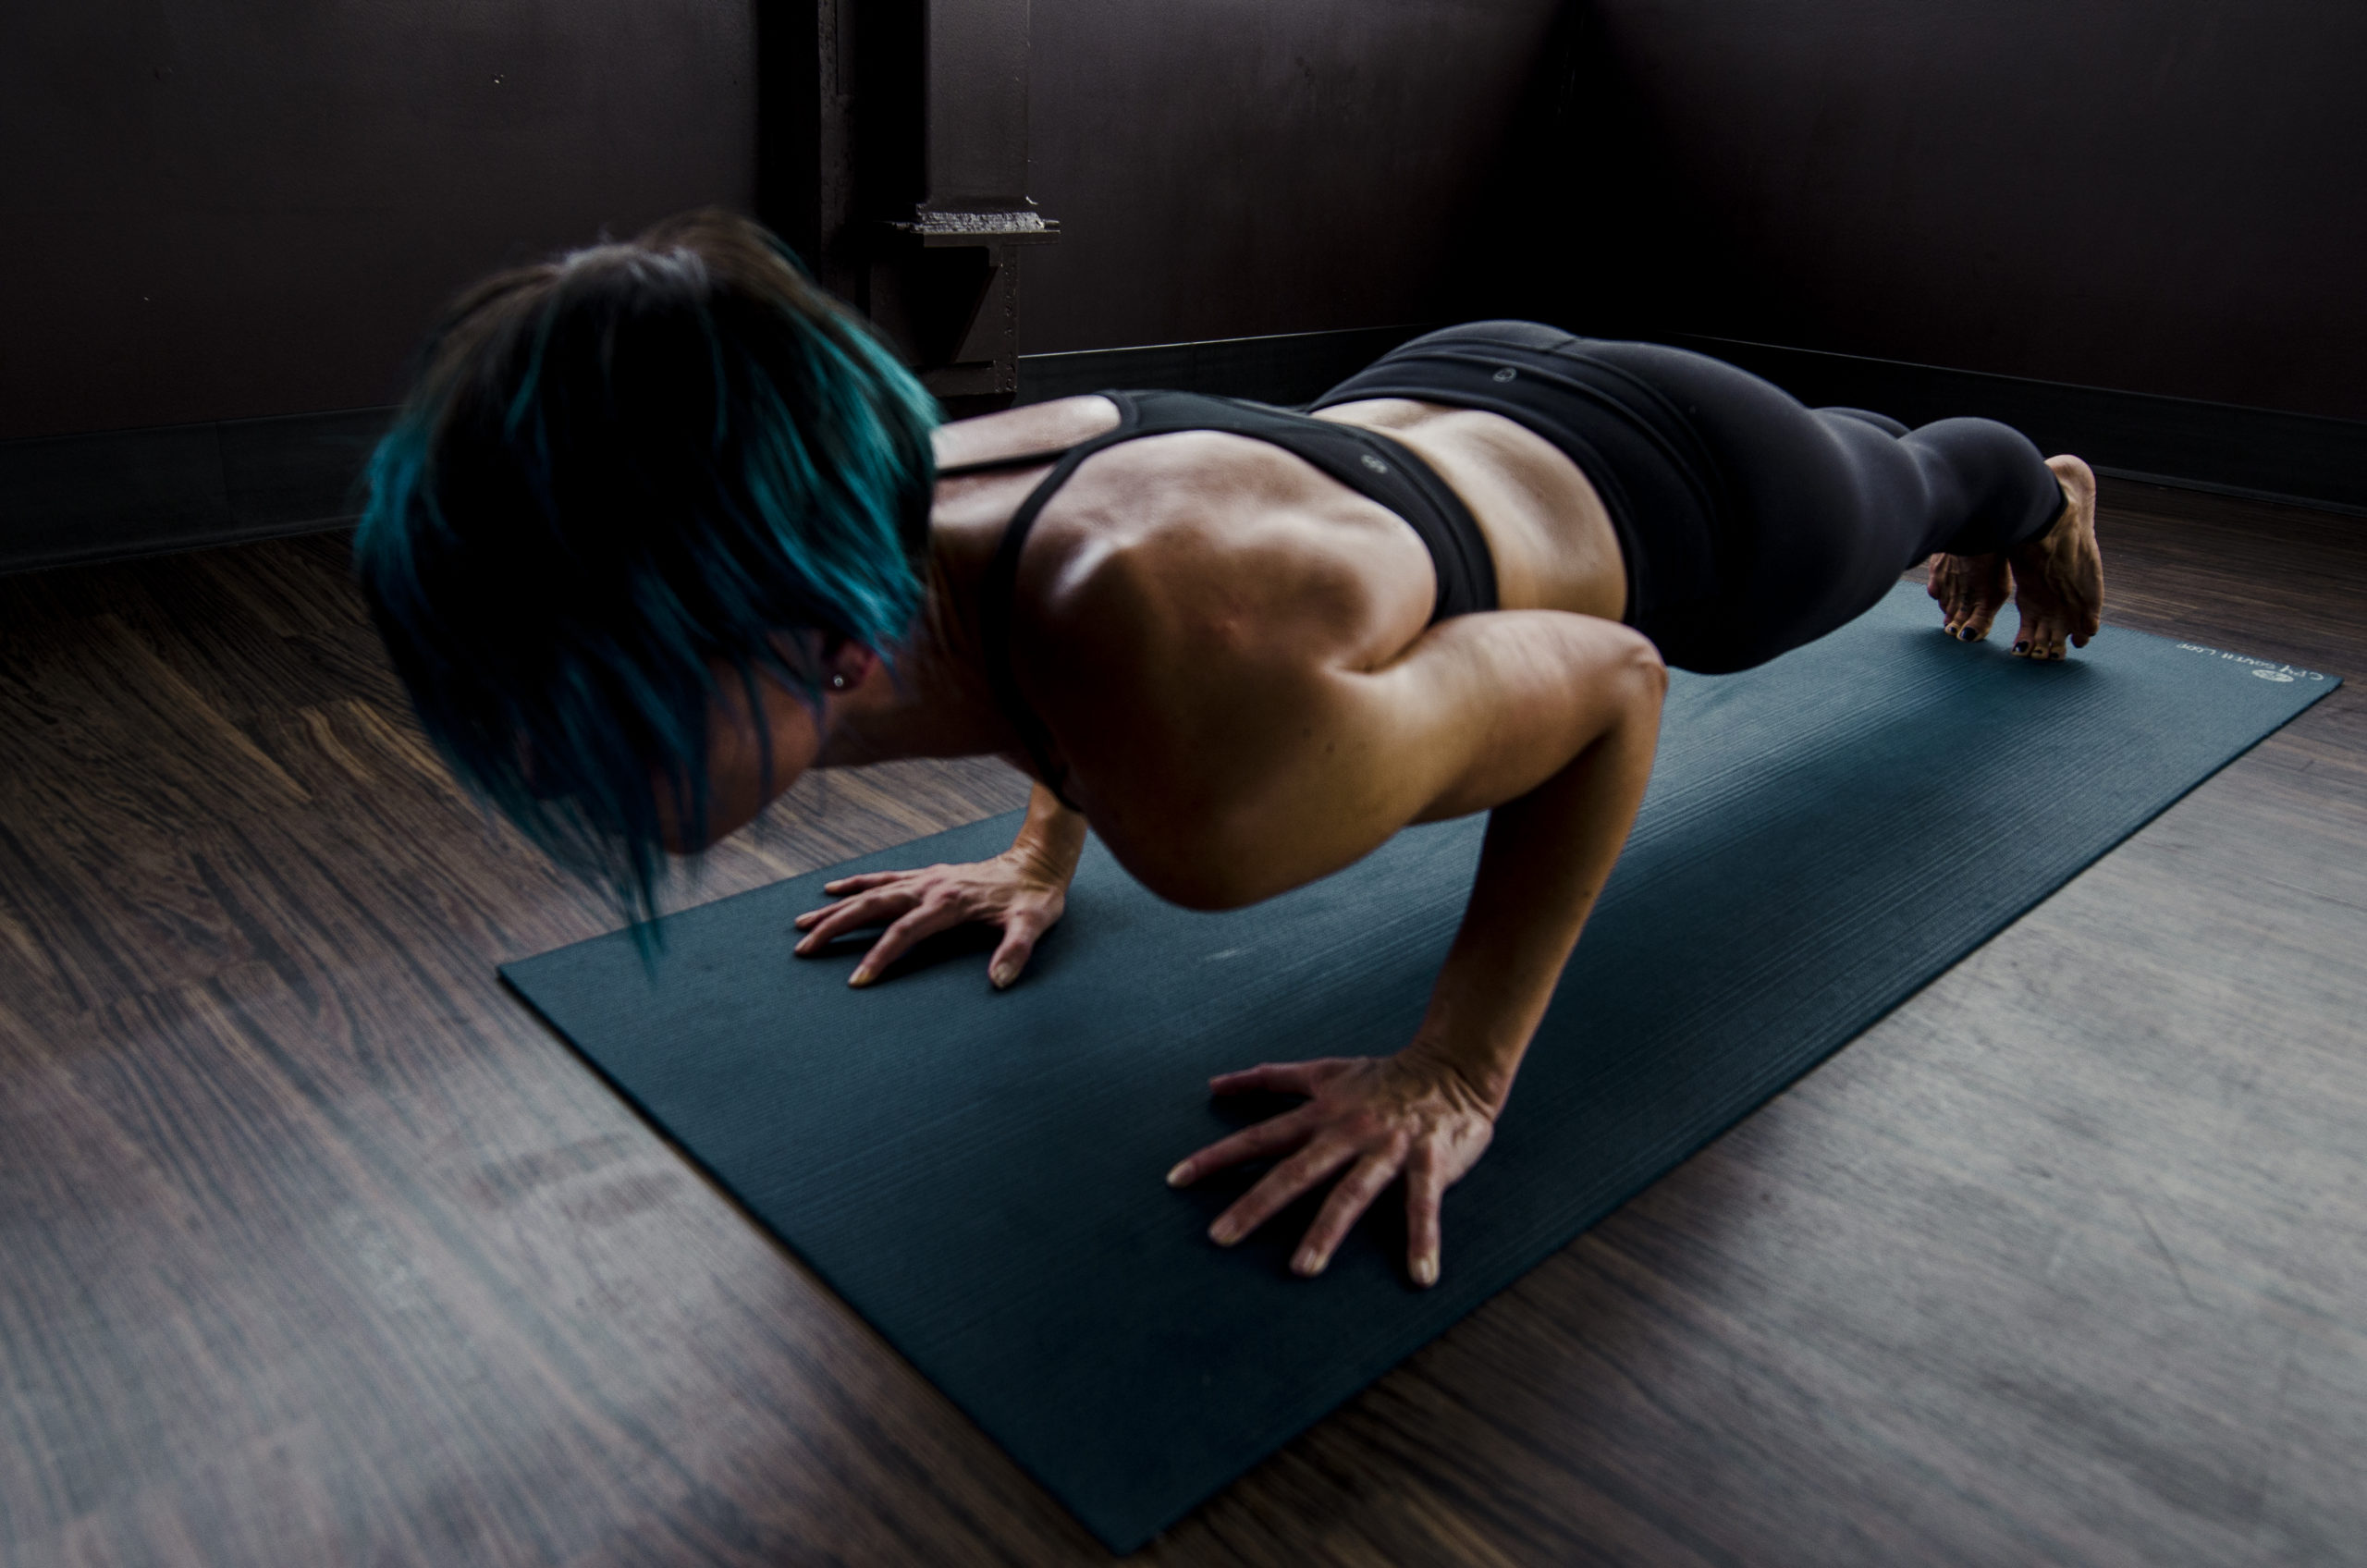 plank exercise for core stability and strength